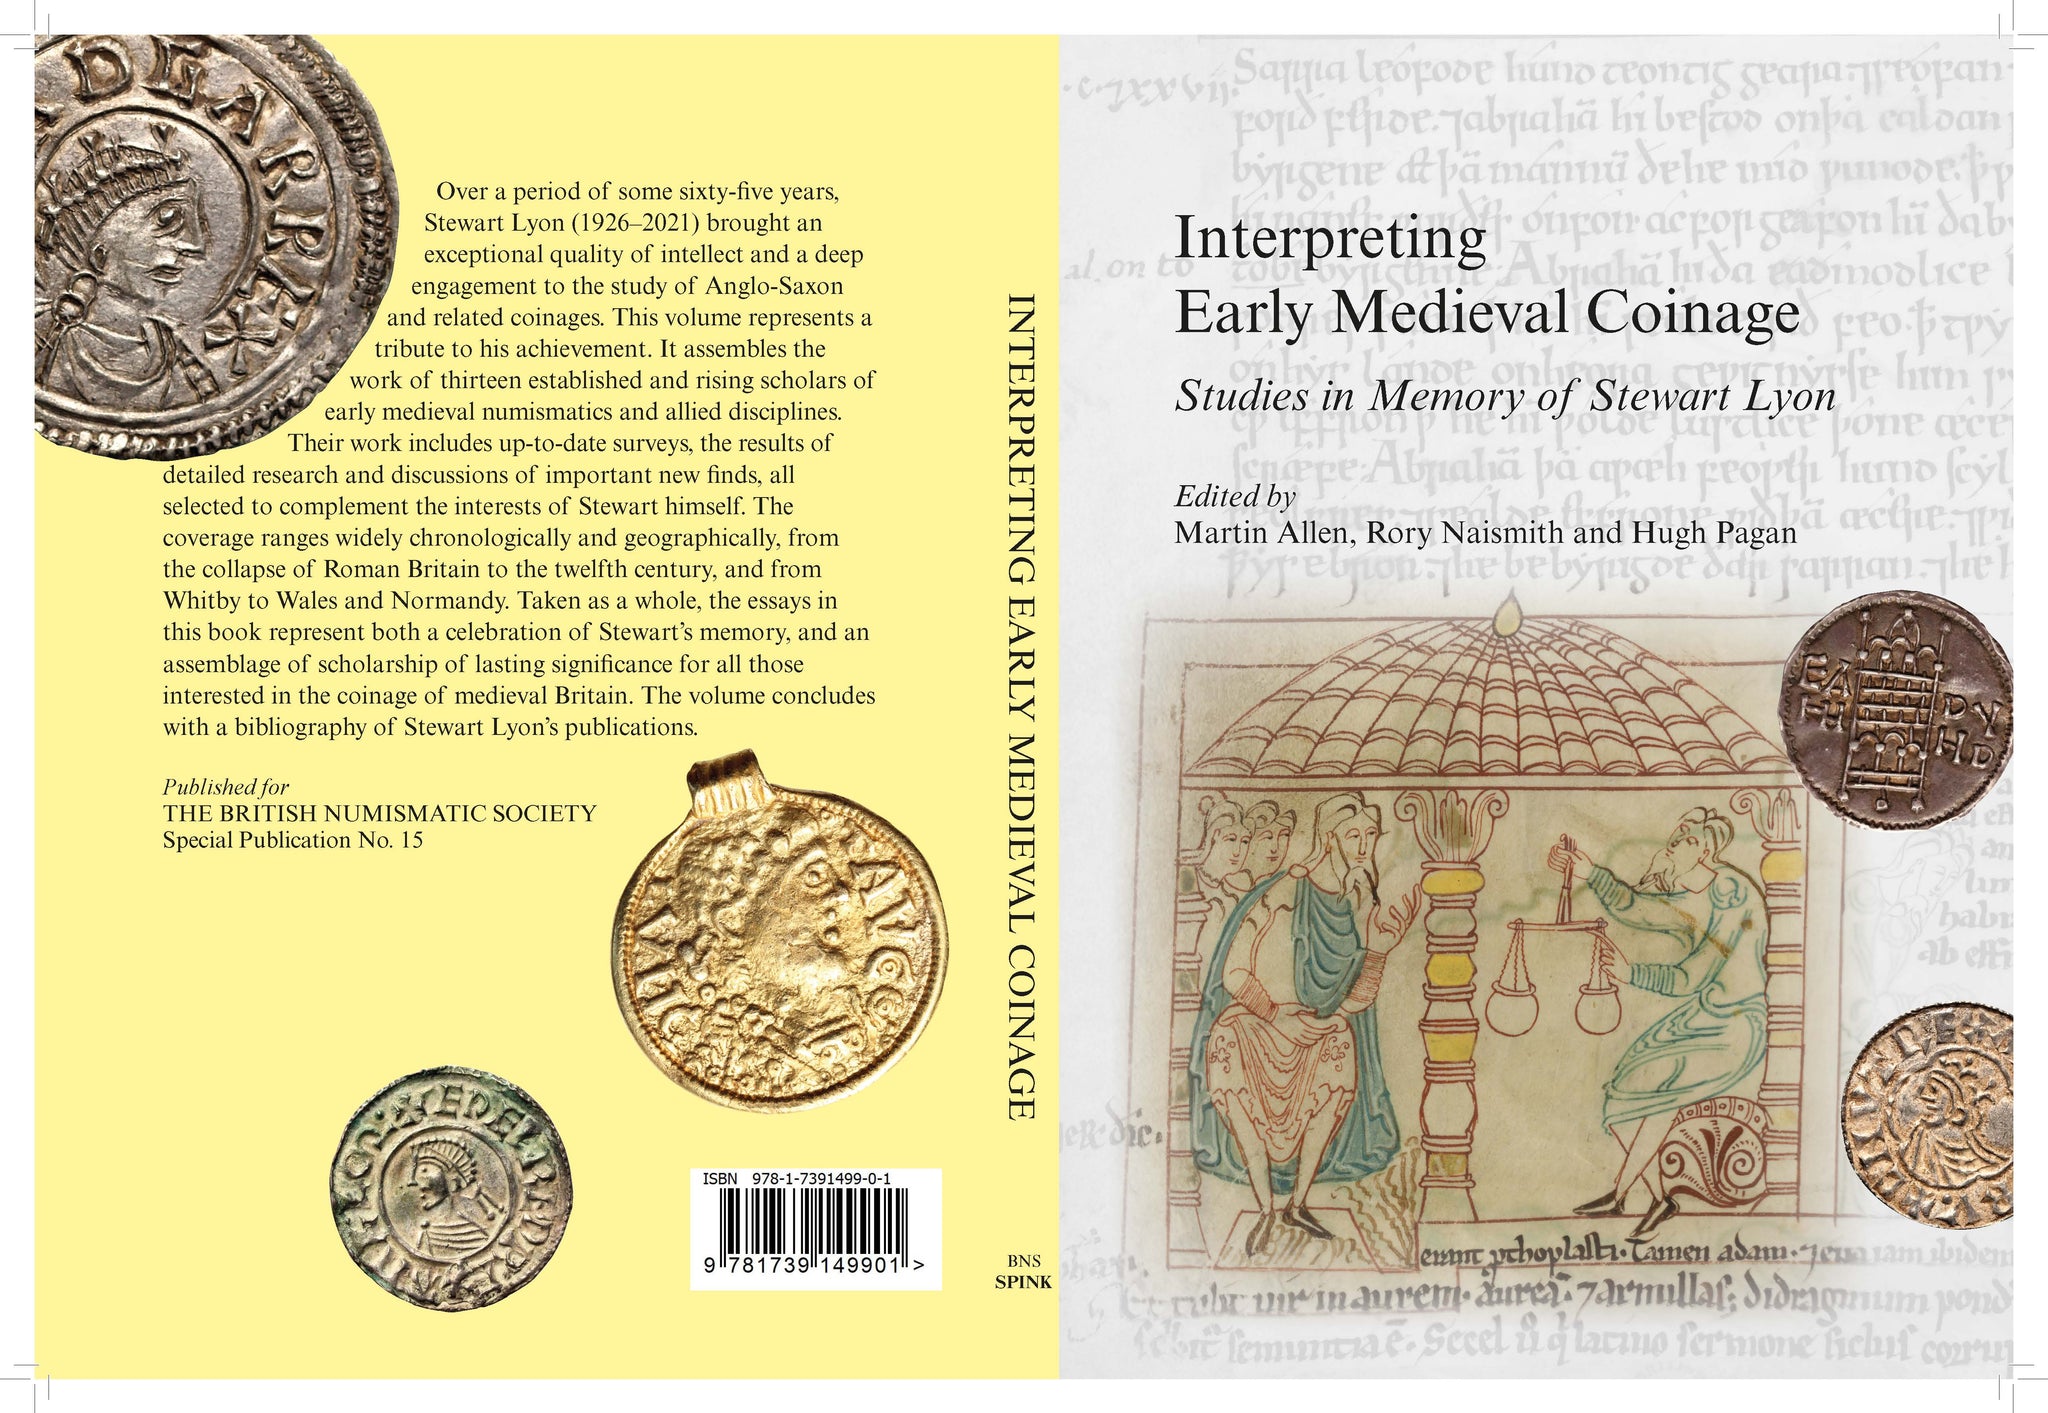 Interpreting Early Medieval Coinage. Essays in Memory of Stewart Lyon, British Numismatic Society Special Publication No. 15, edited by Martin Allen, Rory Naismith and Hugh Pagan